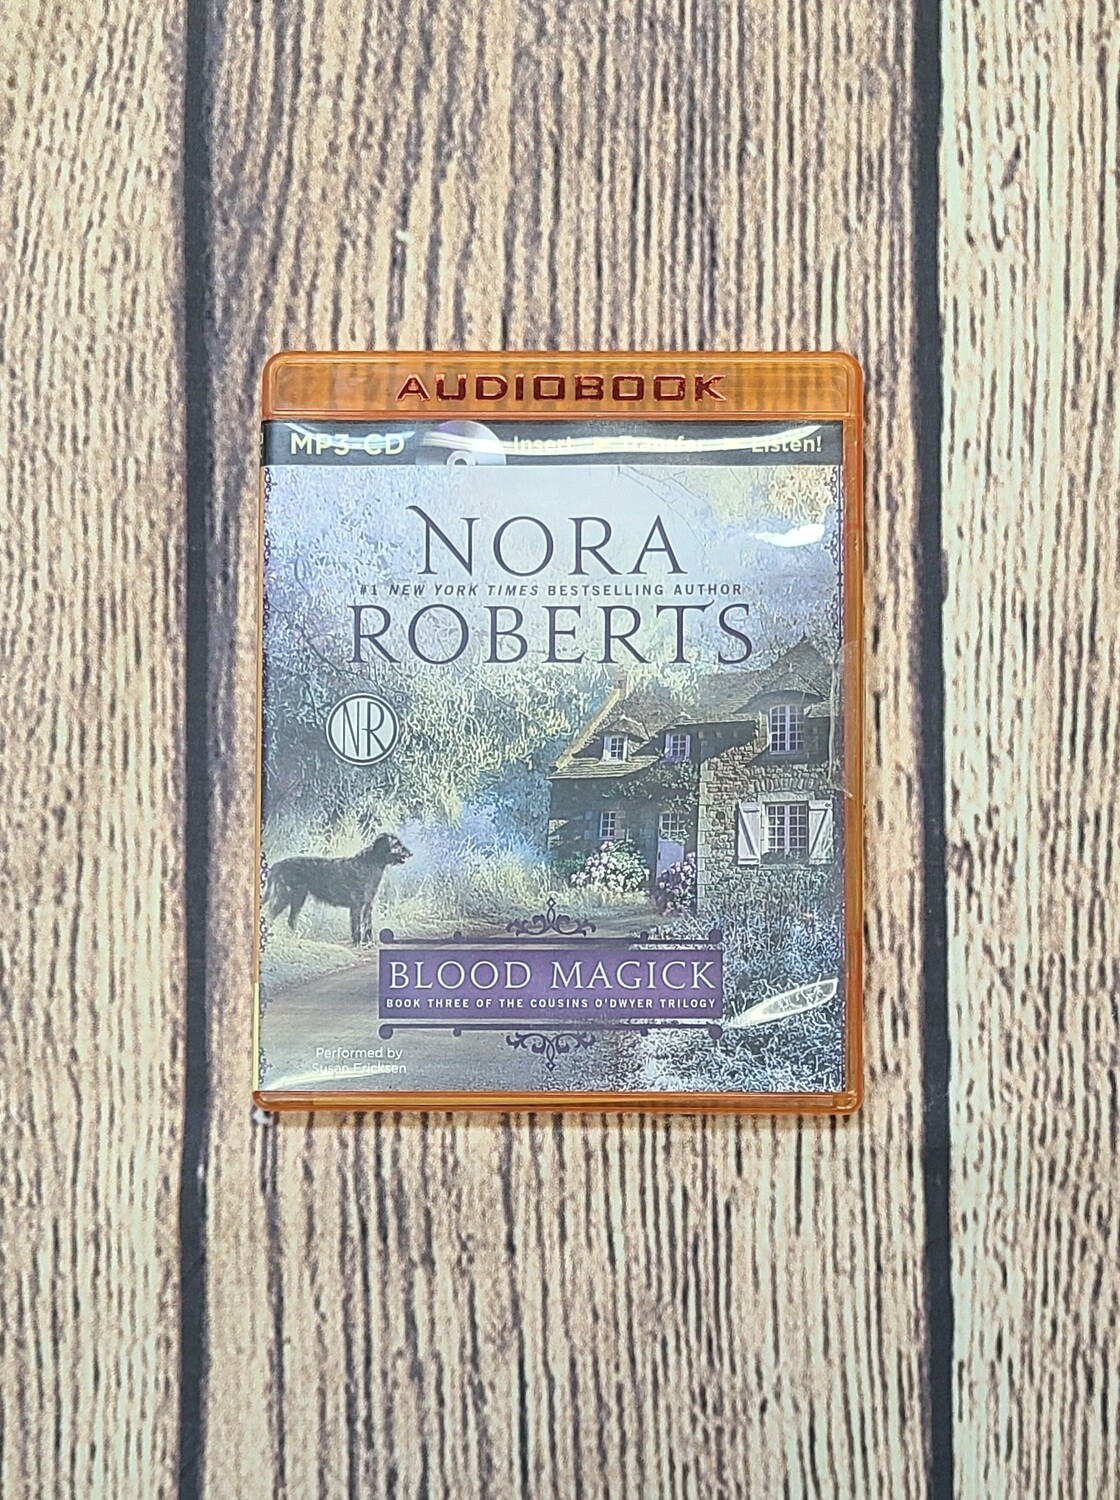 Blood Magick by Nora Roberts - Audiobook CD